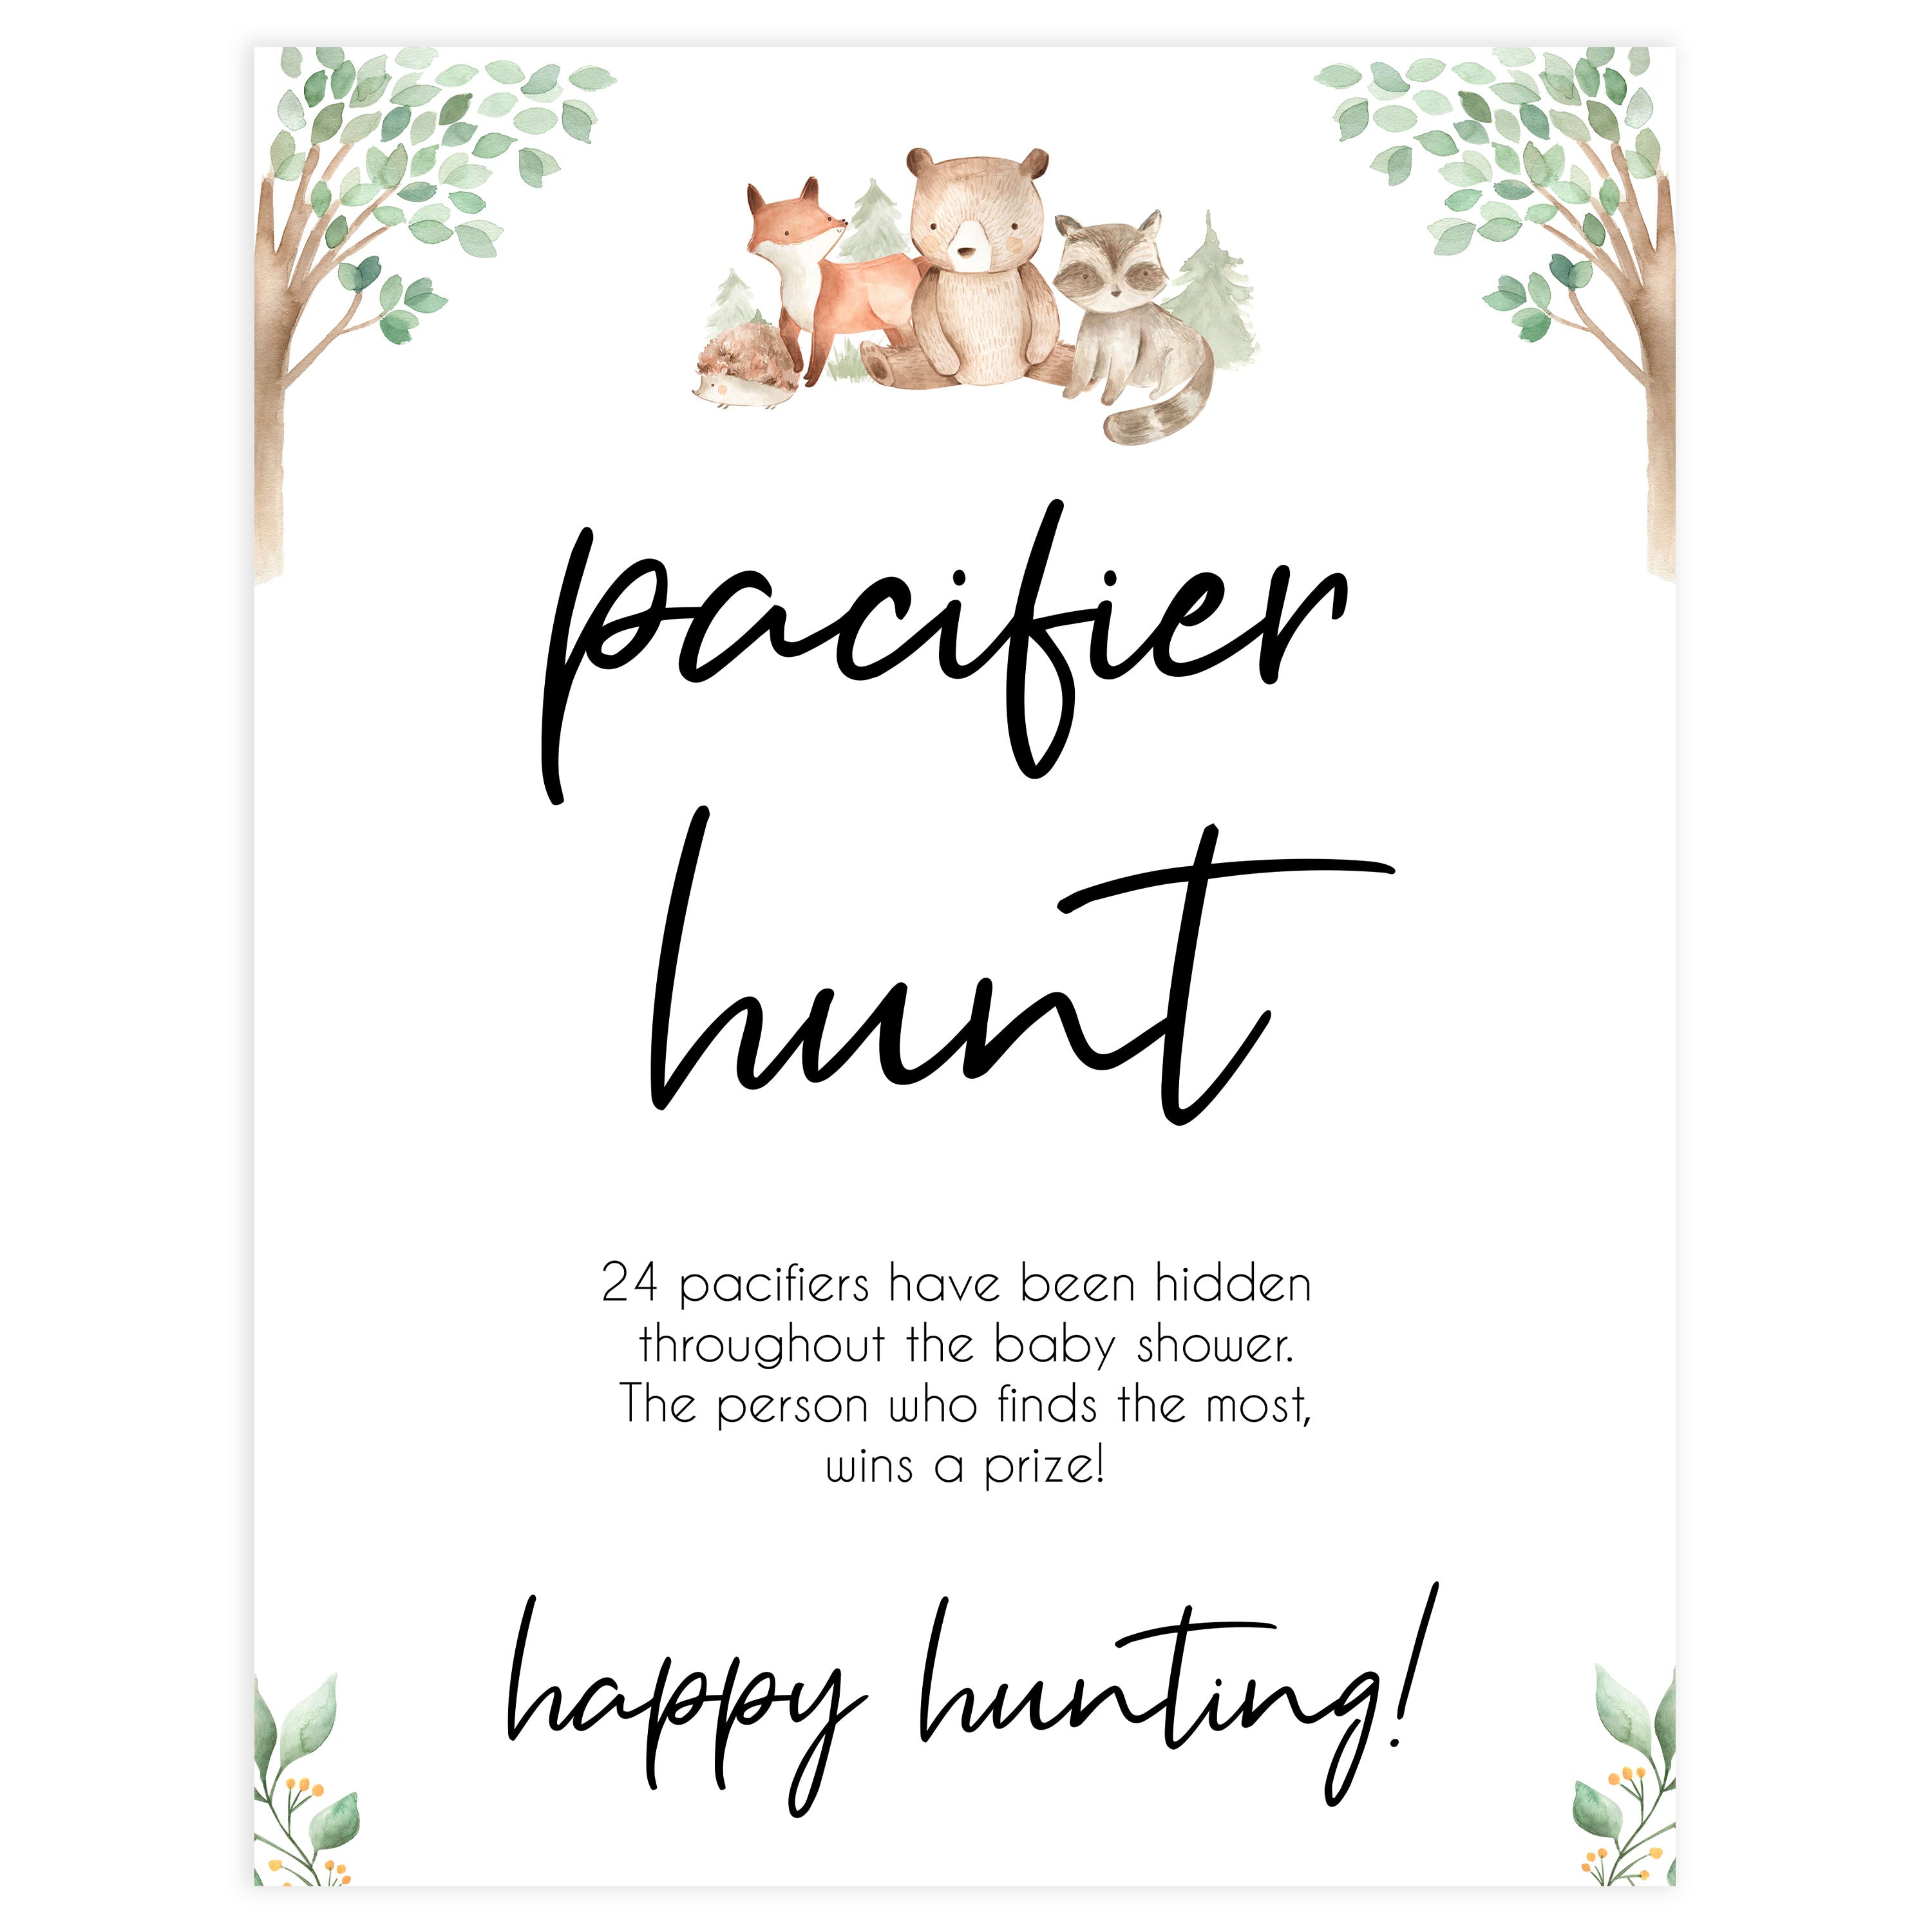 pacifier hunt game, Printable baby shower games, woodland animals baby games, baby shower games, fun baby shower ideas, top baby shower ideas, woodland baby shower, baby shower games, fun woodland animals baby shower ideas